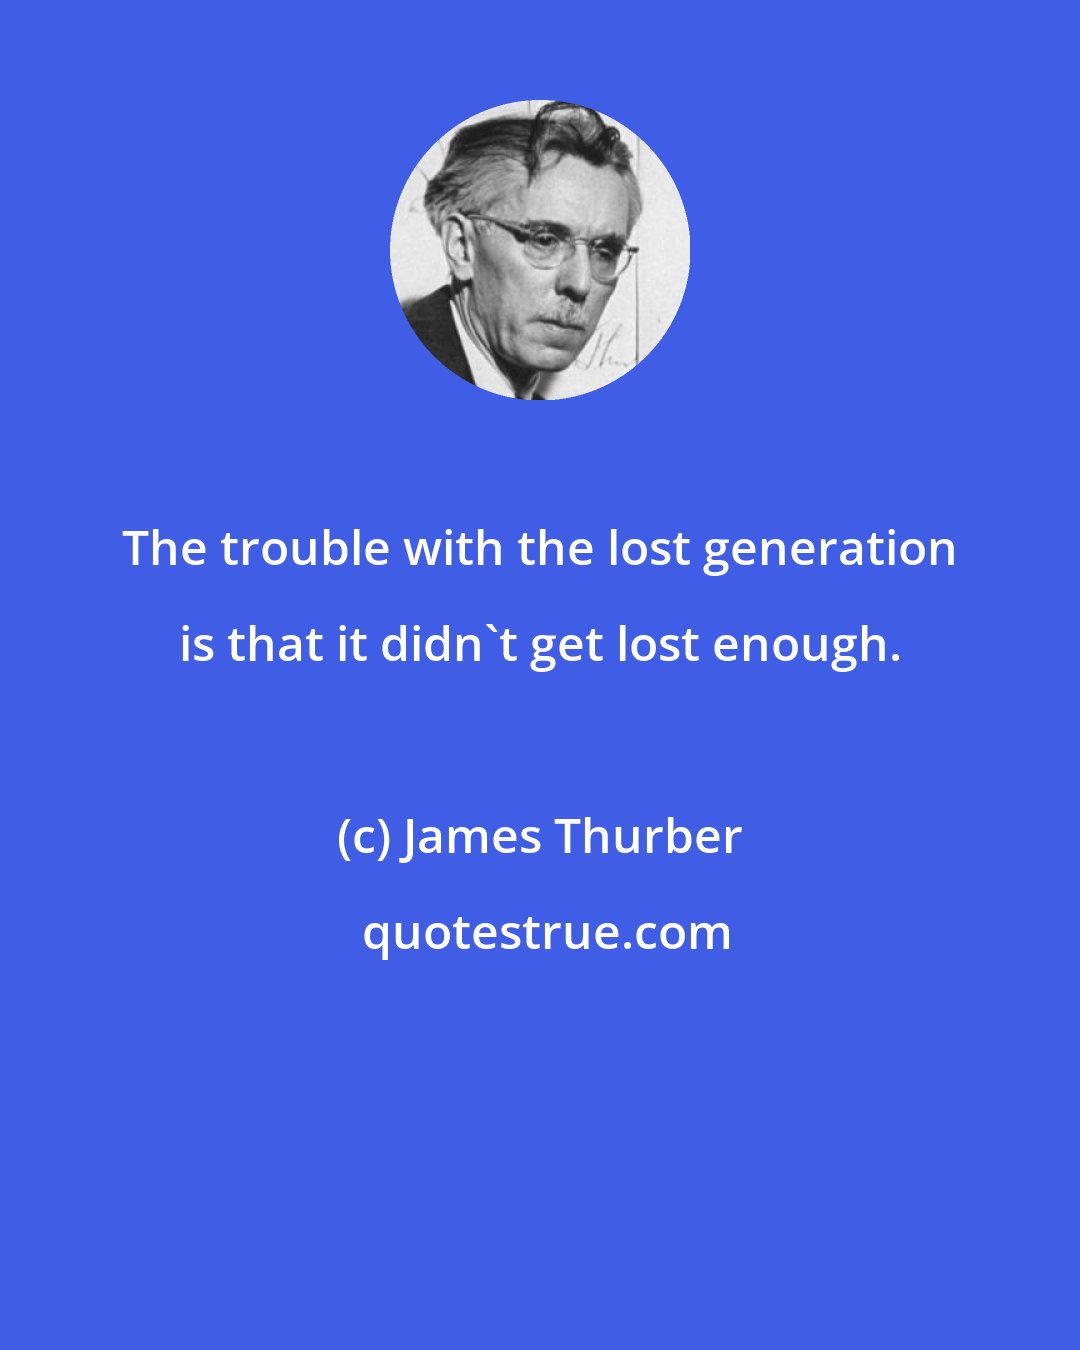 James Thurber: The trouble with the lost generation is that it didn't get lost enough.